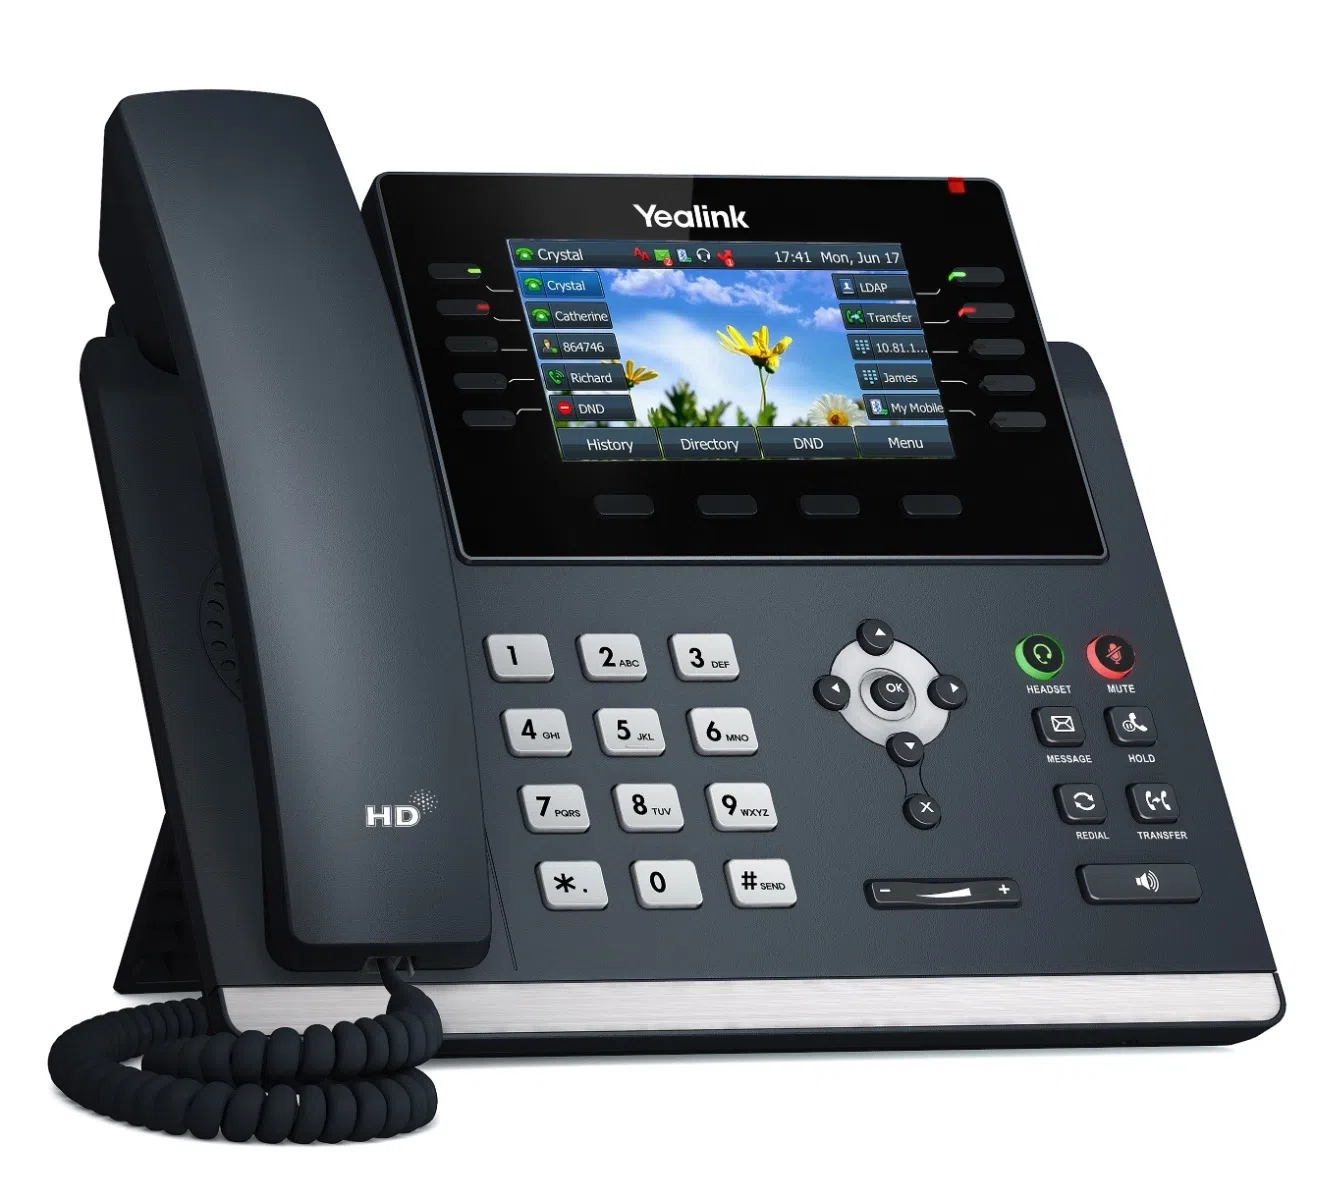 Does the Yealink T46U IP Phone 1301203 support USB recording?